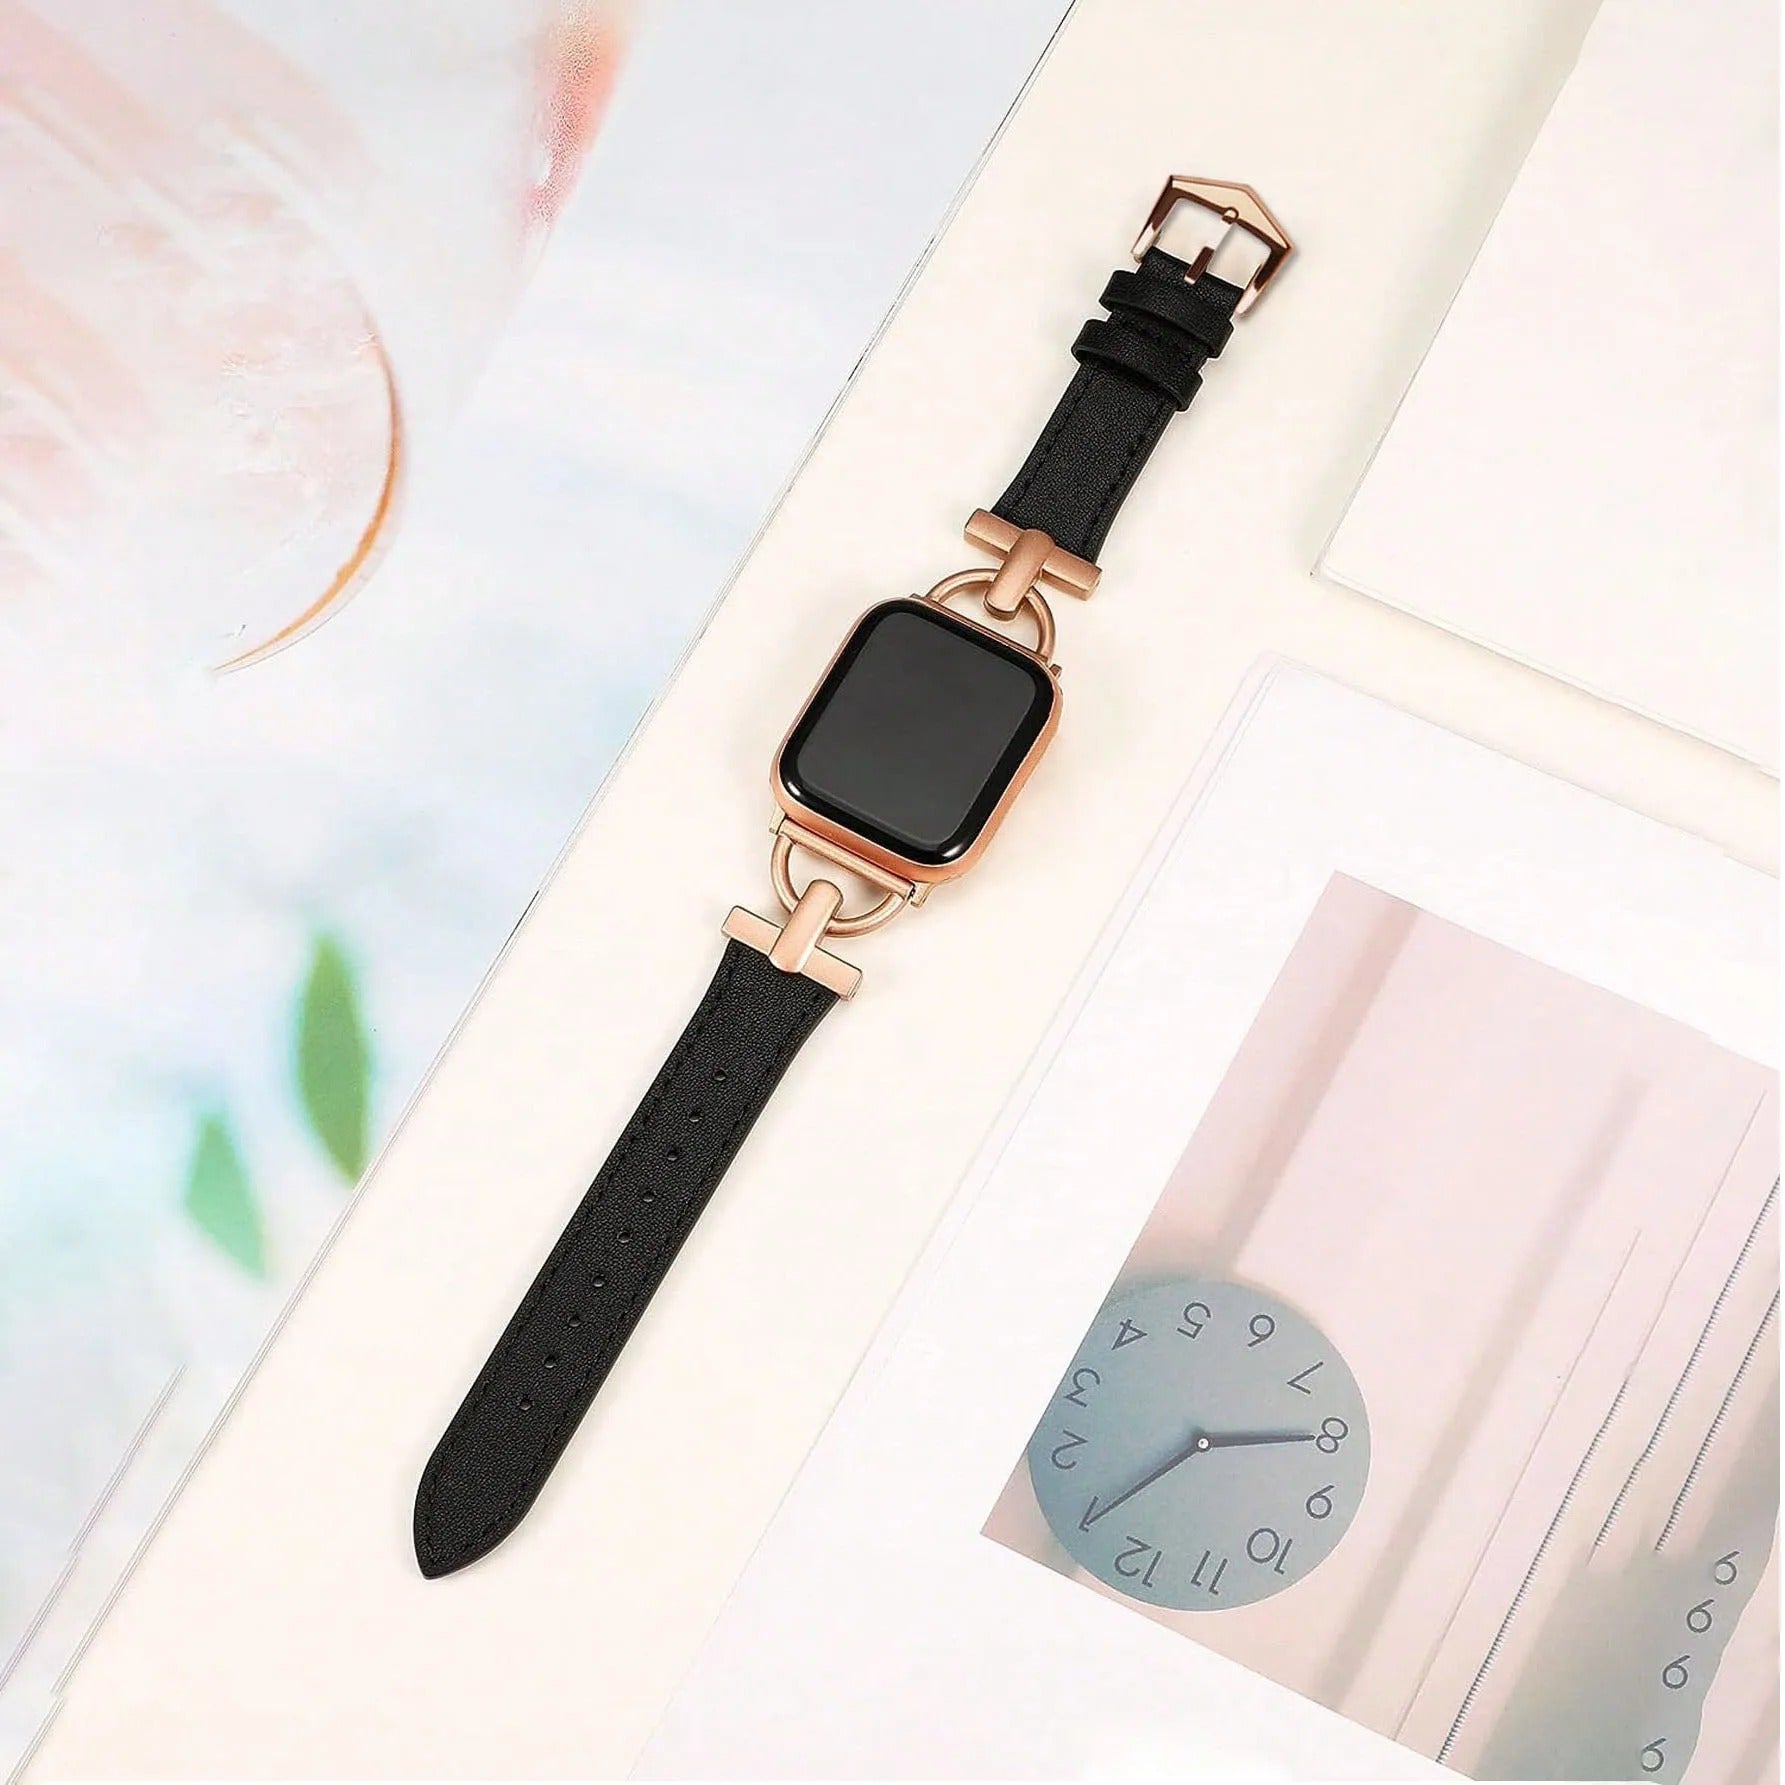 Black Rose Gold Apple Watch Band Installed on an Apple Watch